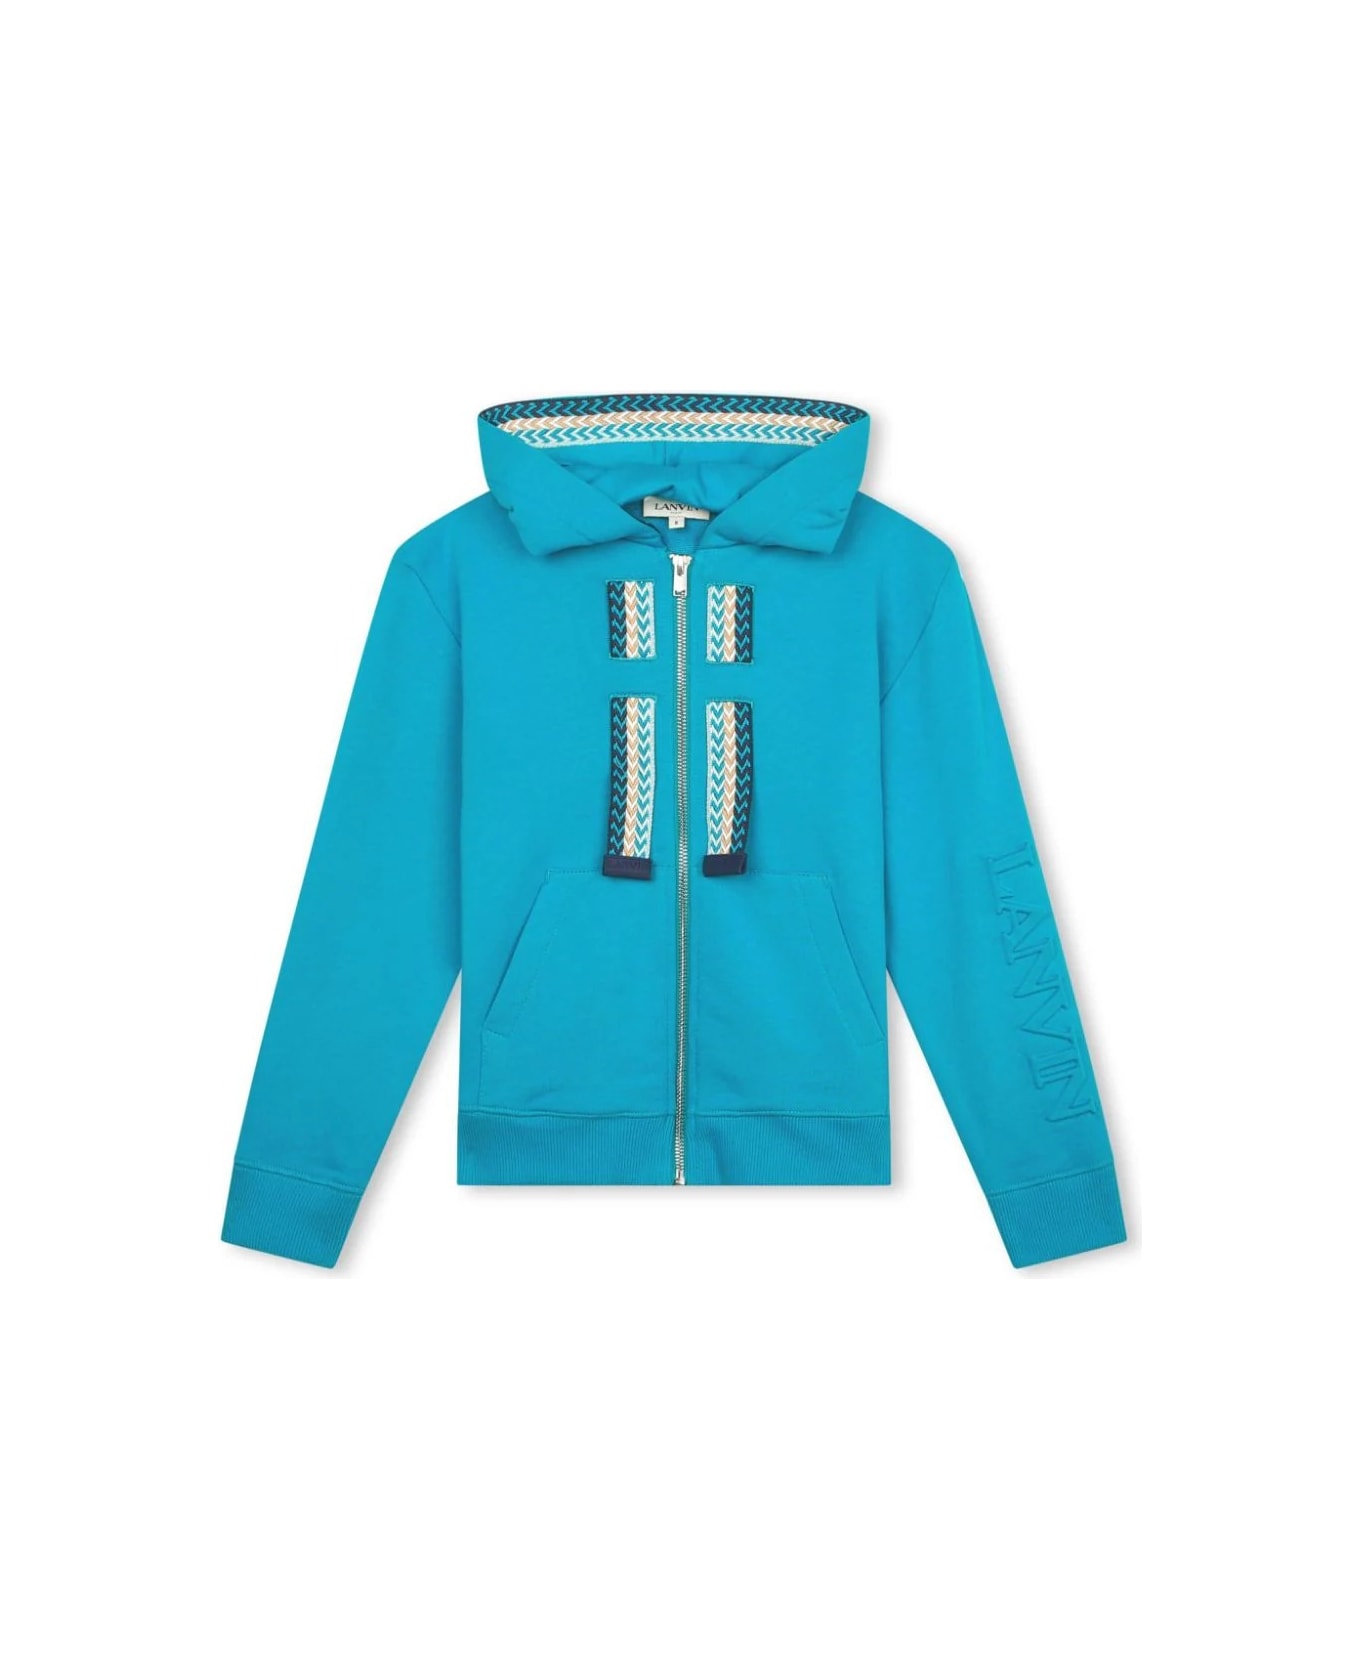 Lanvin Turquoise Hoodie With Logo And "curb" Motif - Blue